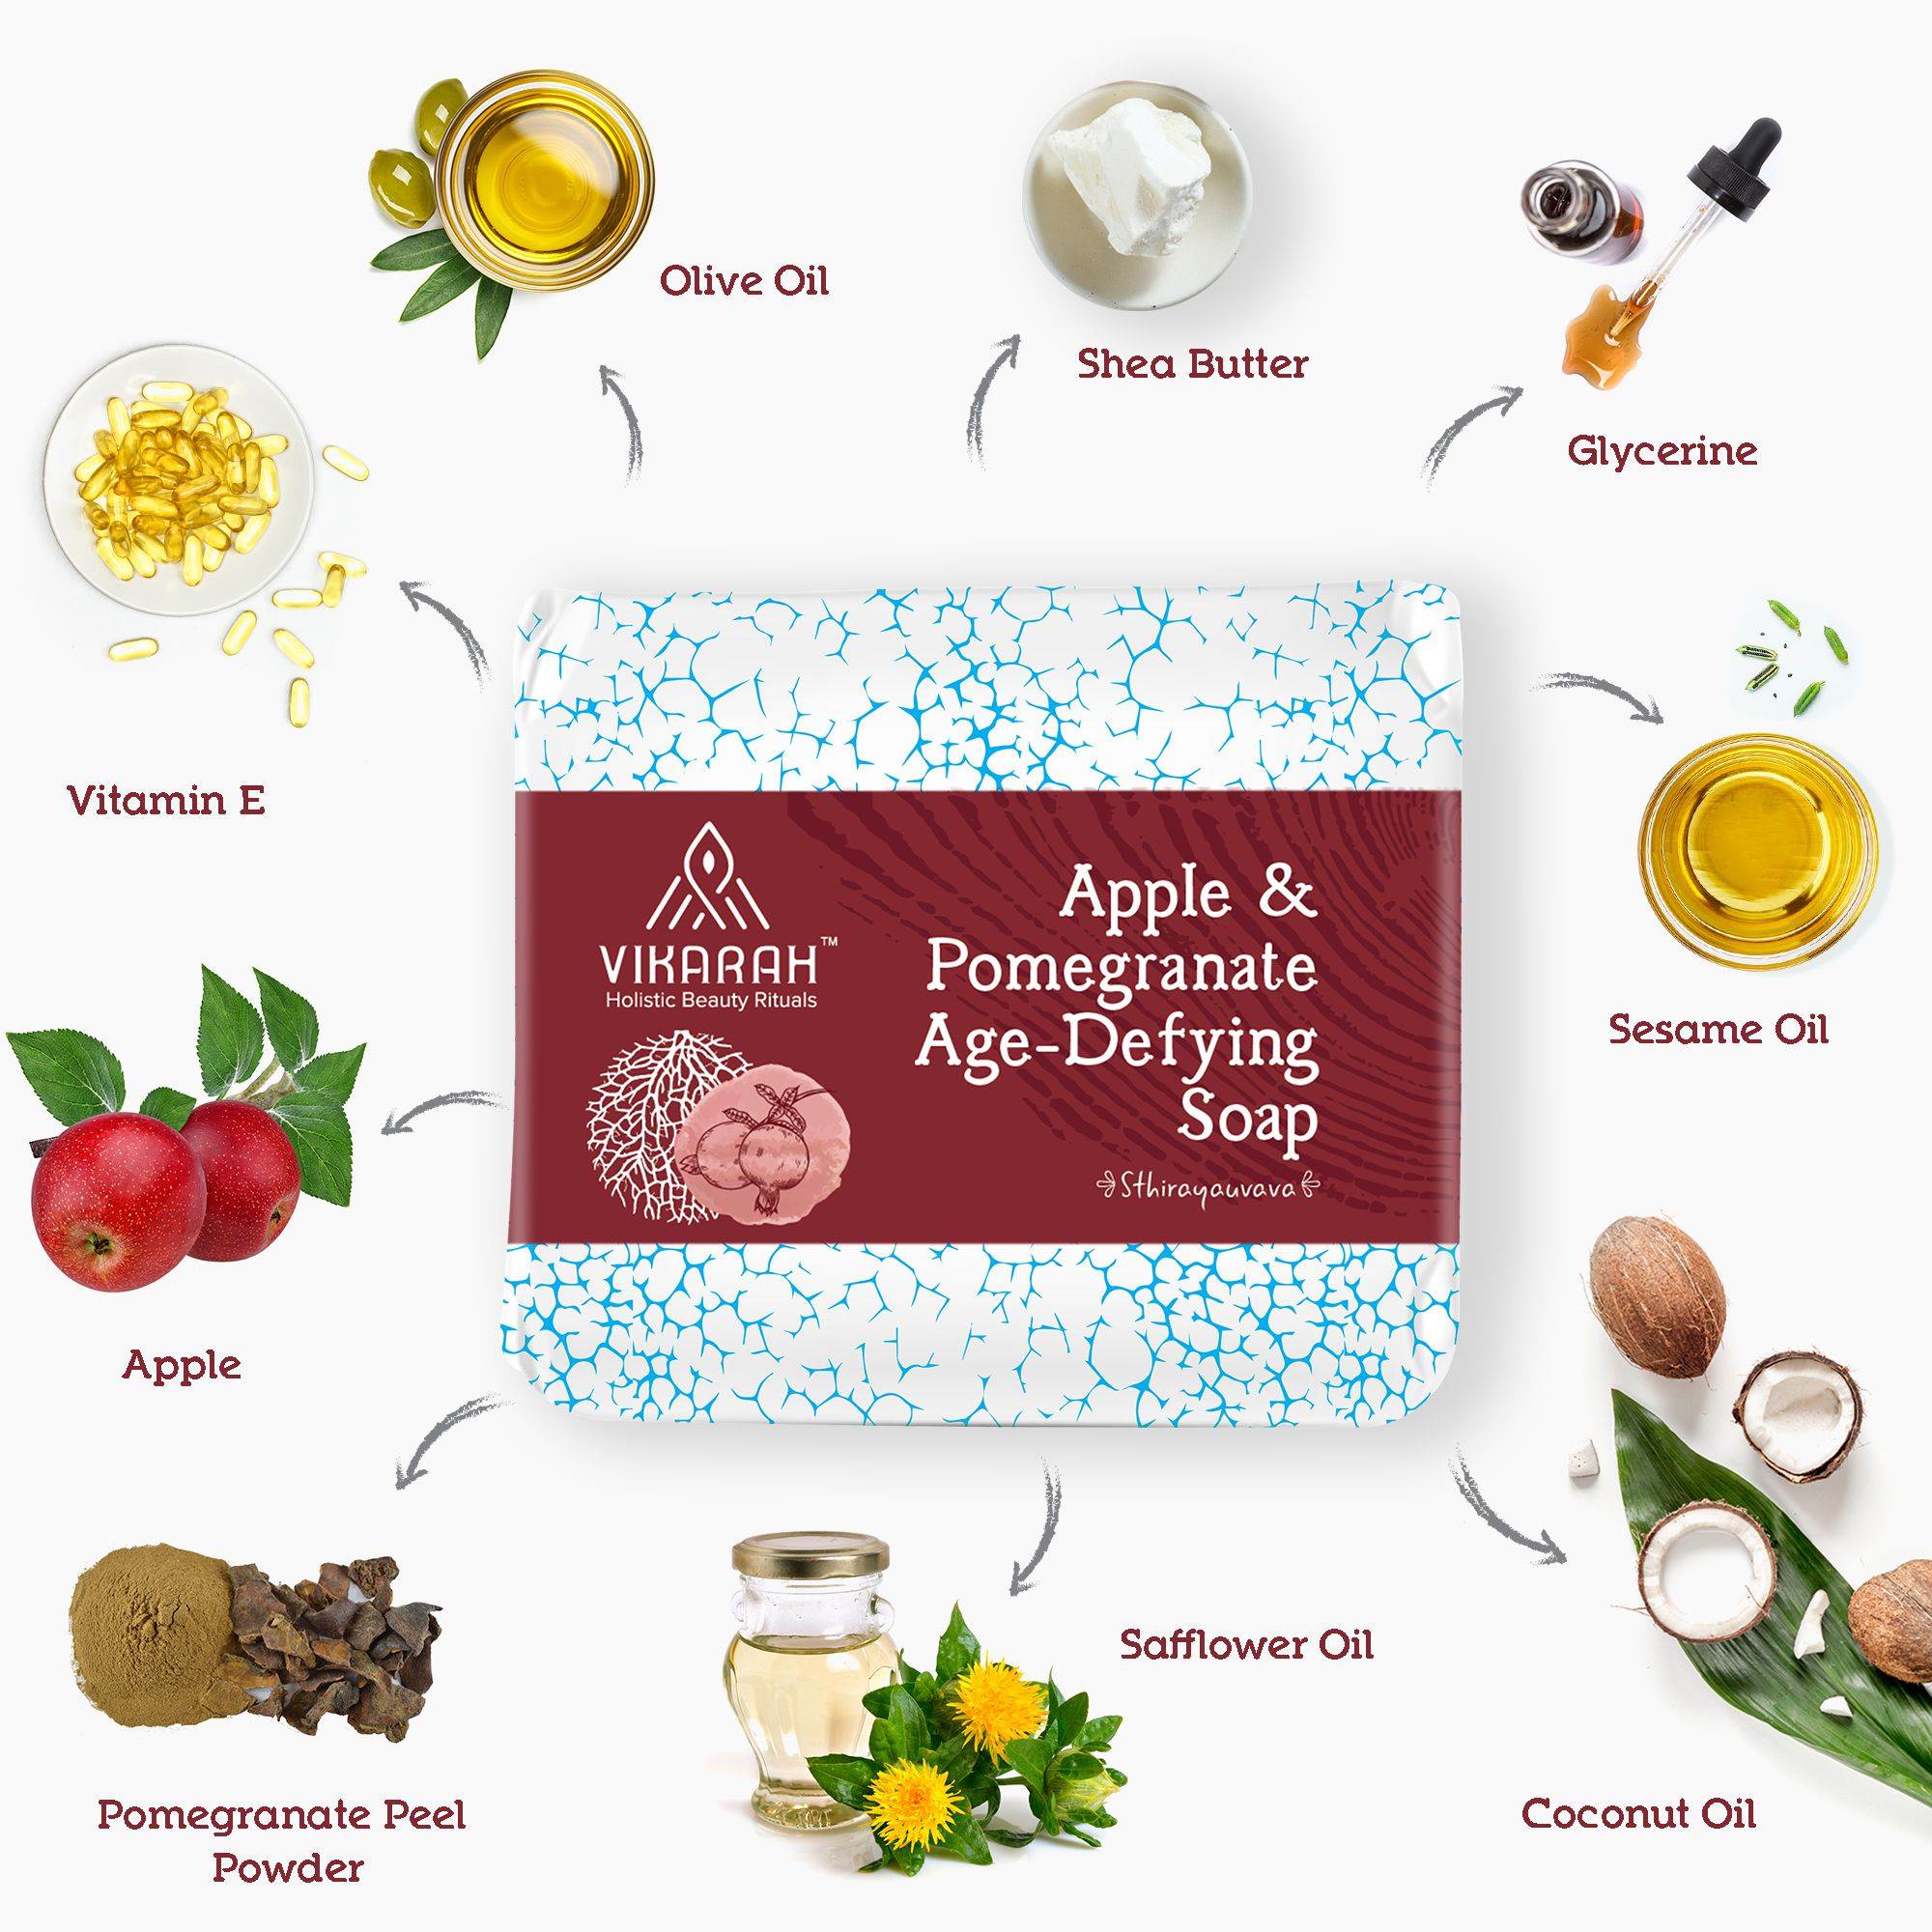 Apple and Pomegranate Age Defying Soap